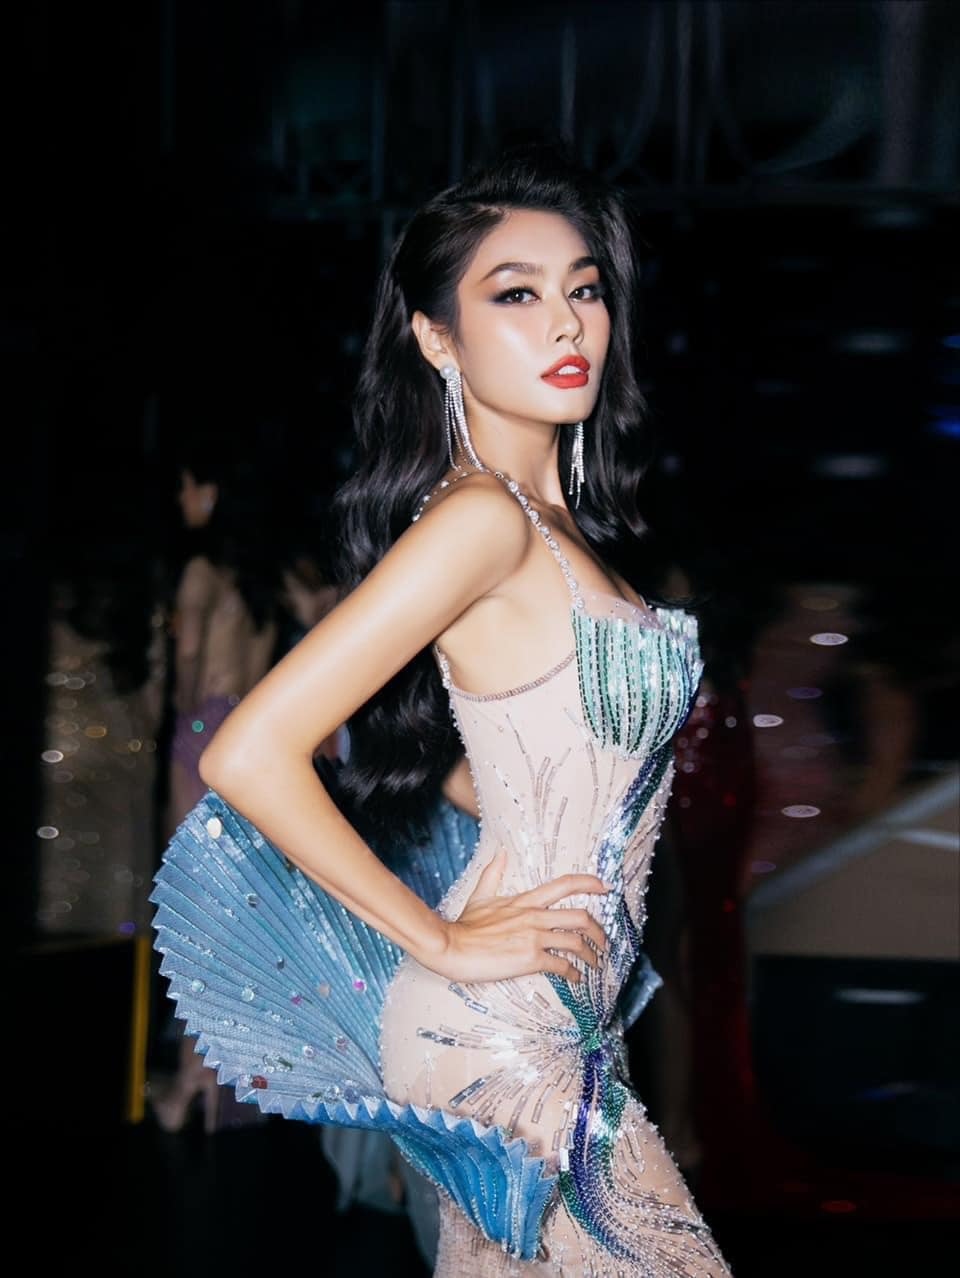 A hau le thao nhi that vong, tiec nuoi khi mat suat thi miss universe 2023 hinh anh 1